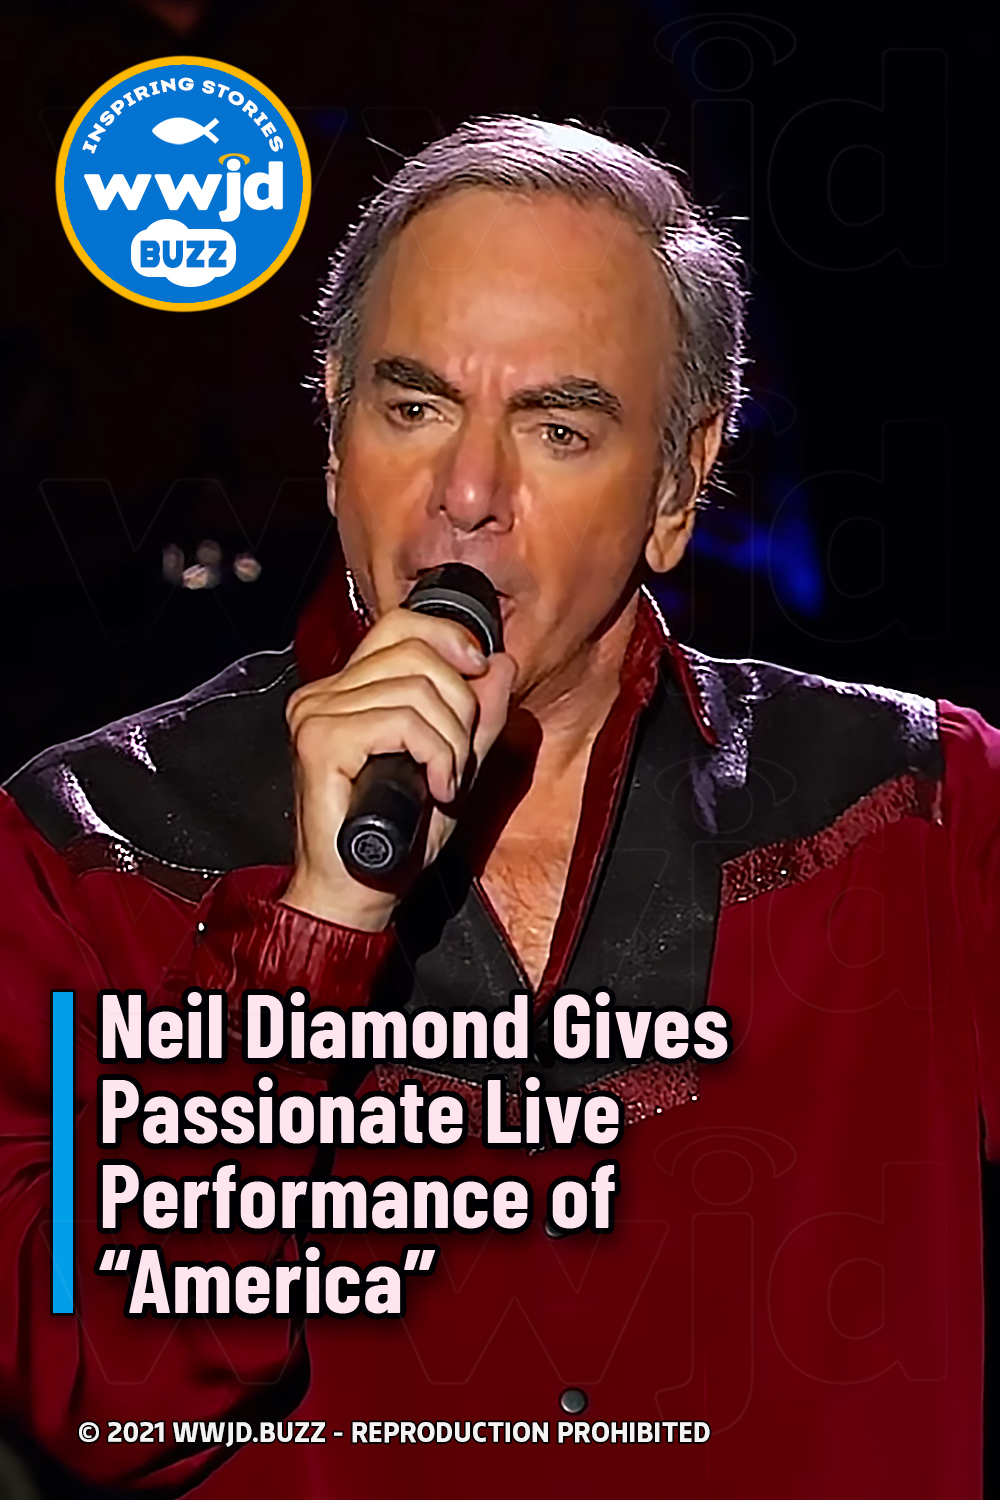 Neil Diamond Gives Passionate Live Performance of “America”